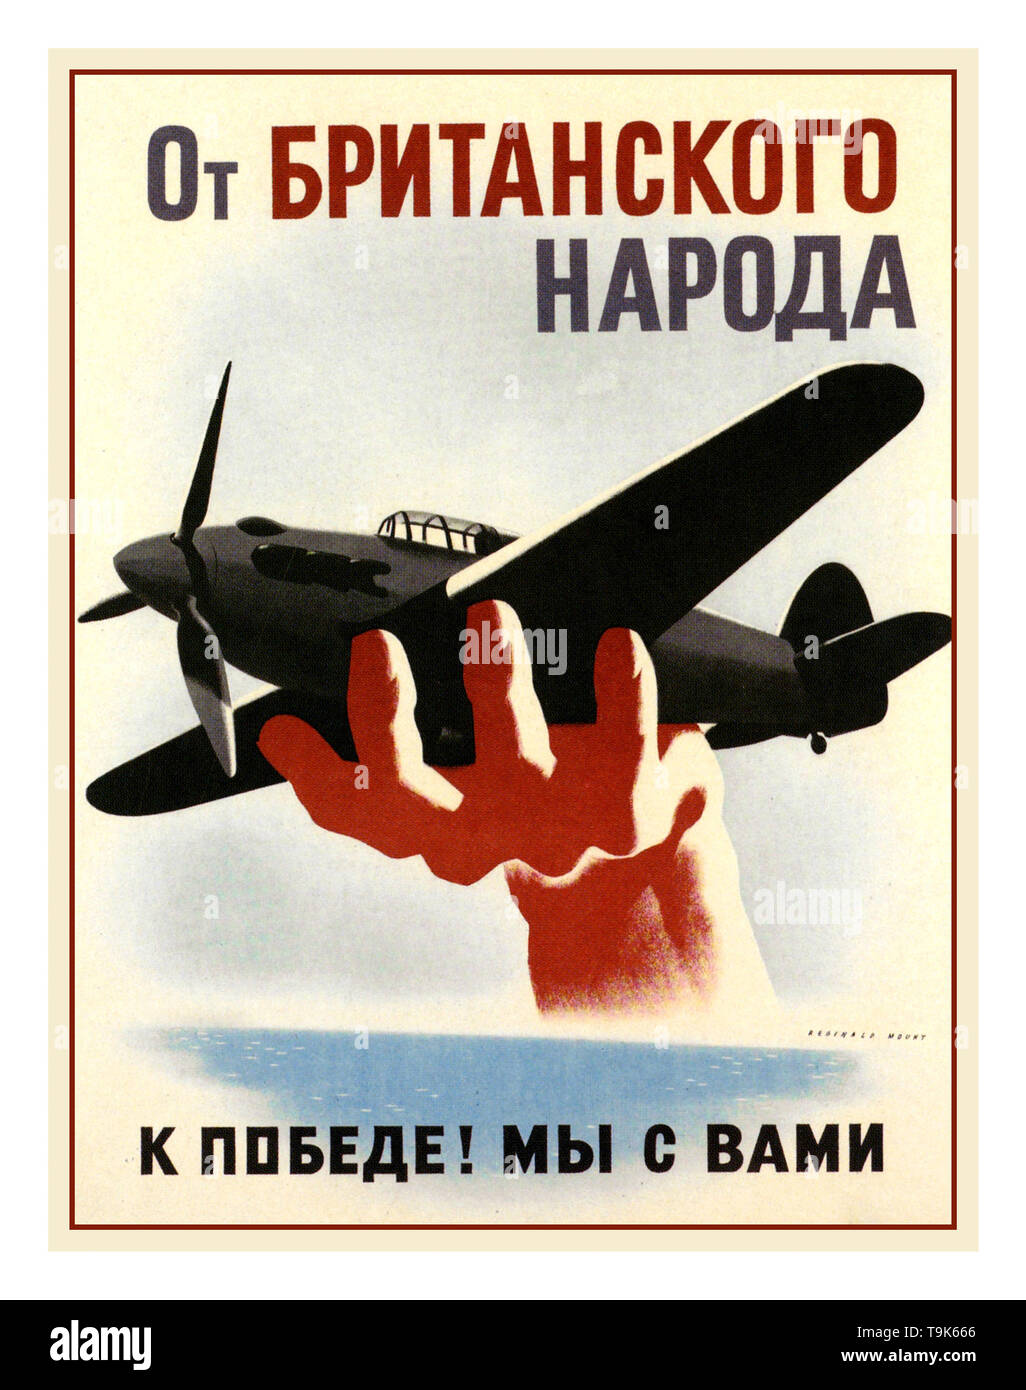 Vintage 1940's WW2 British Propaganda Poster in Russian to support USSR Soviet Russia during World War II  “From the British People: Towards Victory ! We are With You” Hand holding a WW2 Spitfire Fighter Aircraft aloft in solidarity with the USSR Soviet Russia allies against Nazi Germany Stock Photo